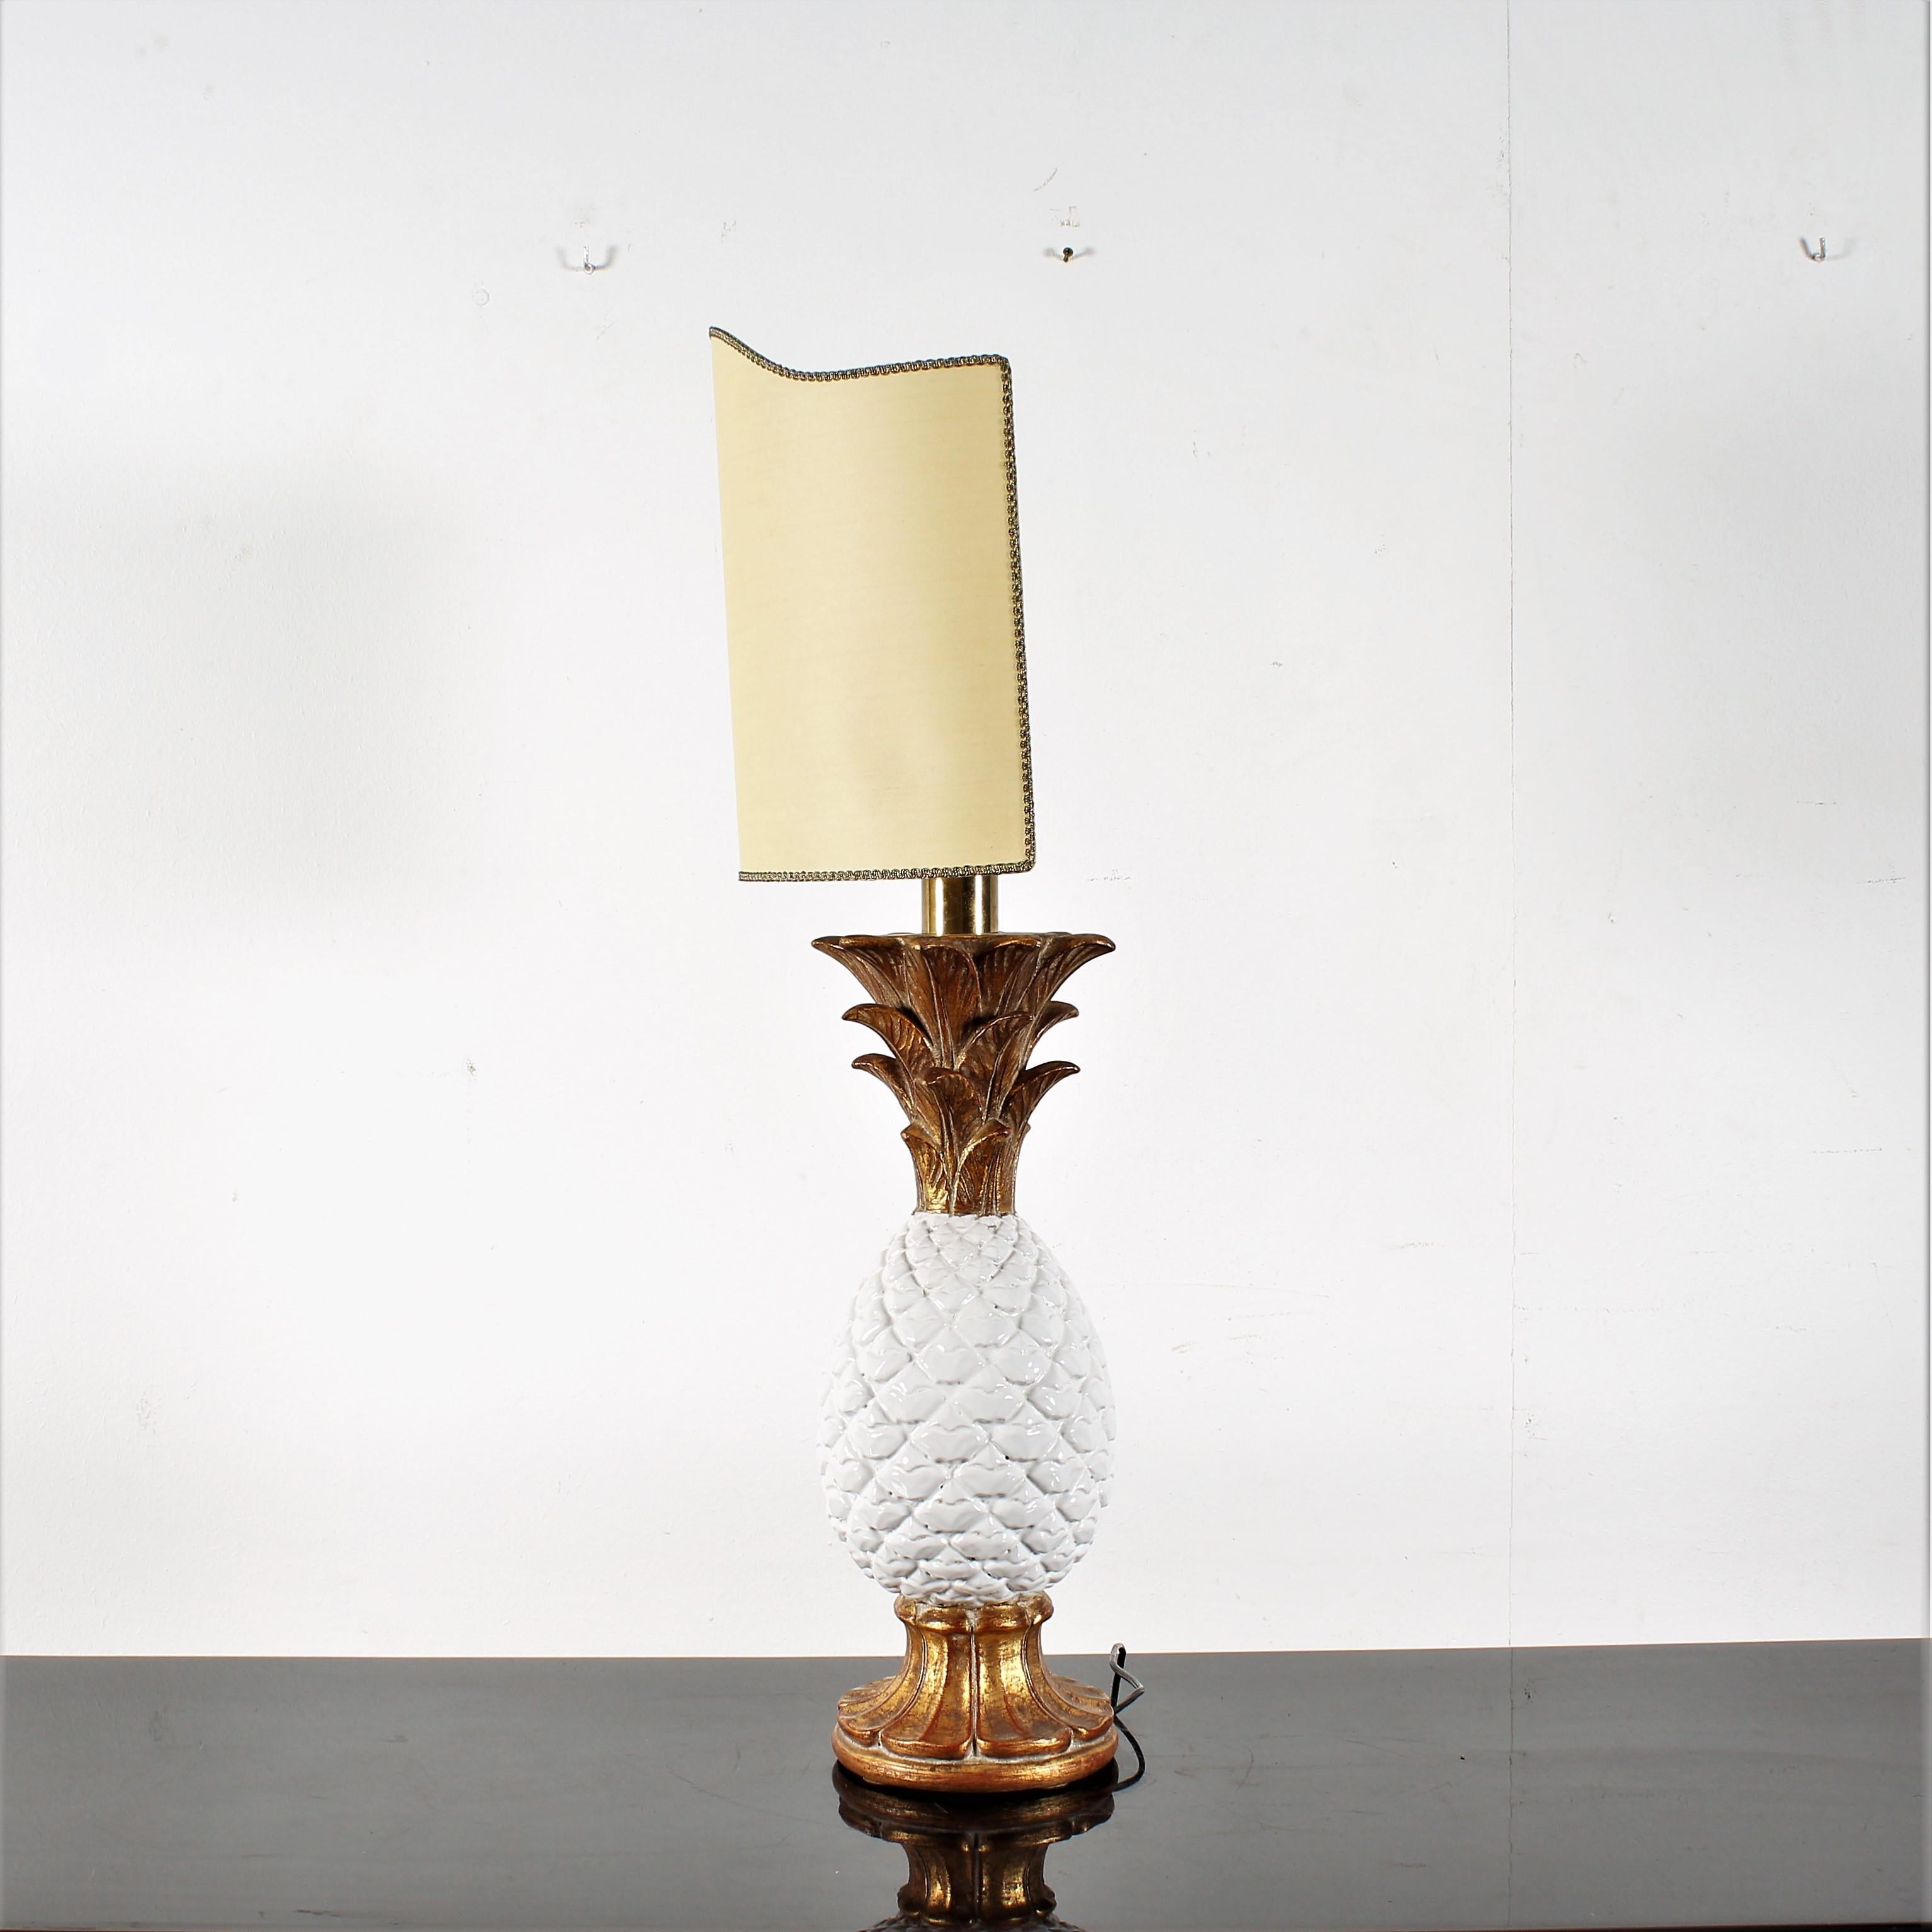 Urbano Zaccagnini design table lamp, produced in Italy in the 1960s. Ceramic structure in the shape of a pineapple. Fabric lampshade. Hand painted brand name on the bottom.
Wear consistent with age and use.